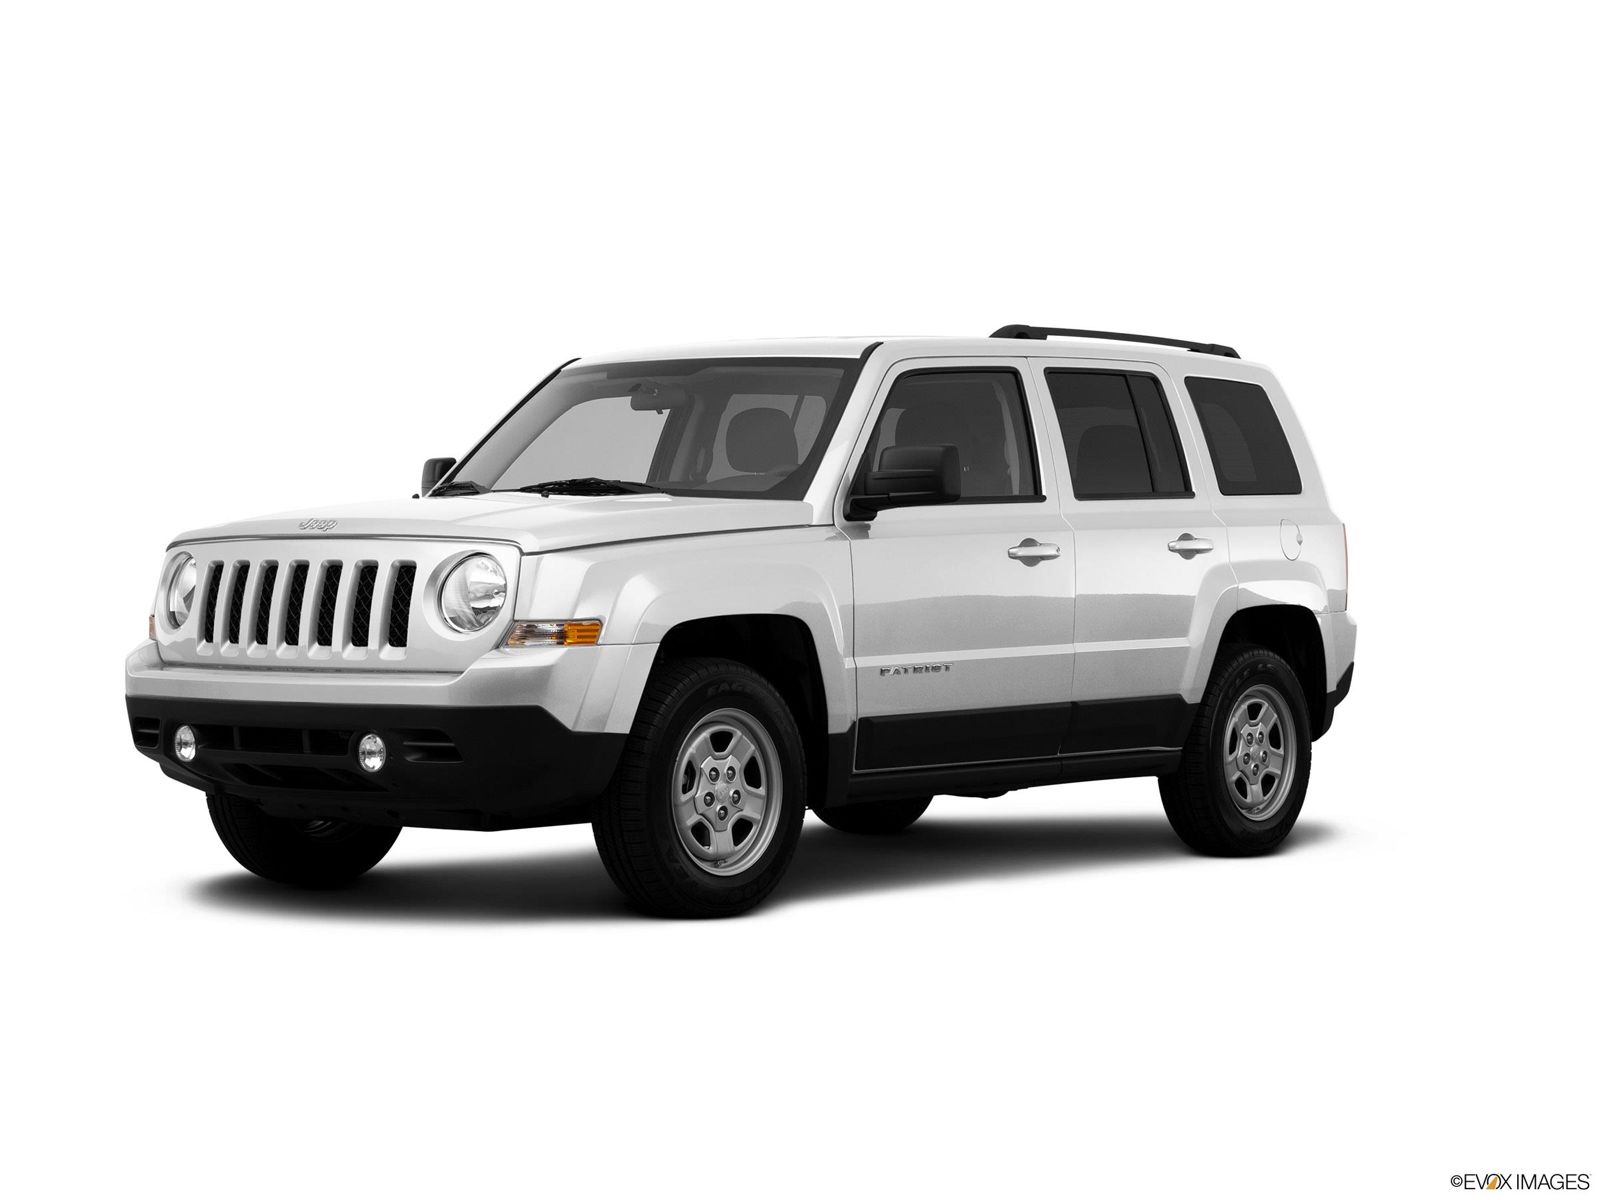 2012 Jeep Patriot Research, Photos, Specs and Expertise | CarMax